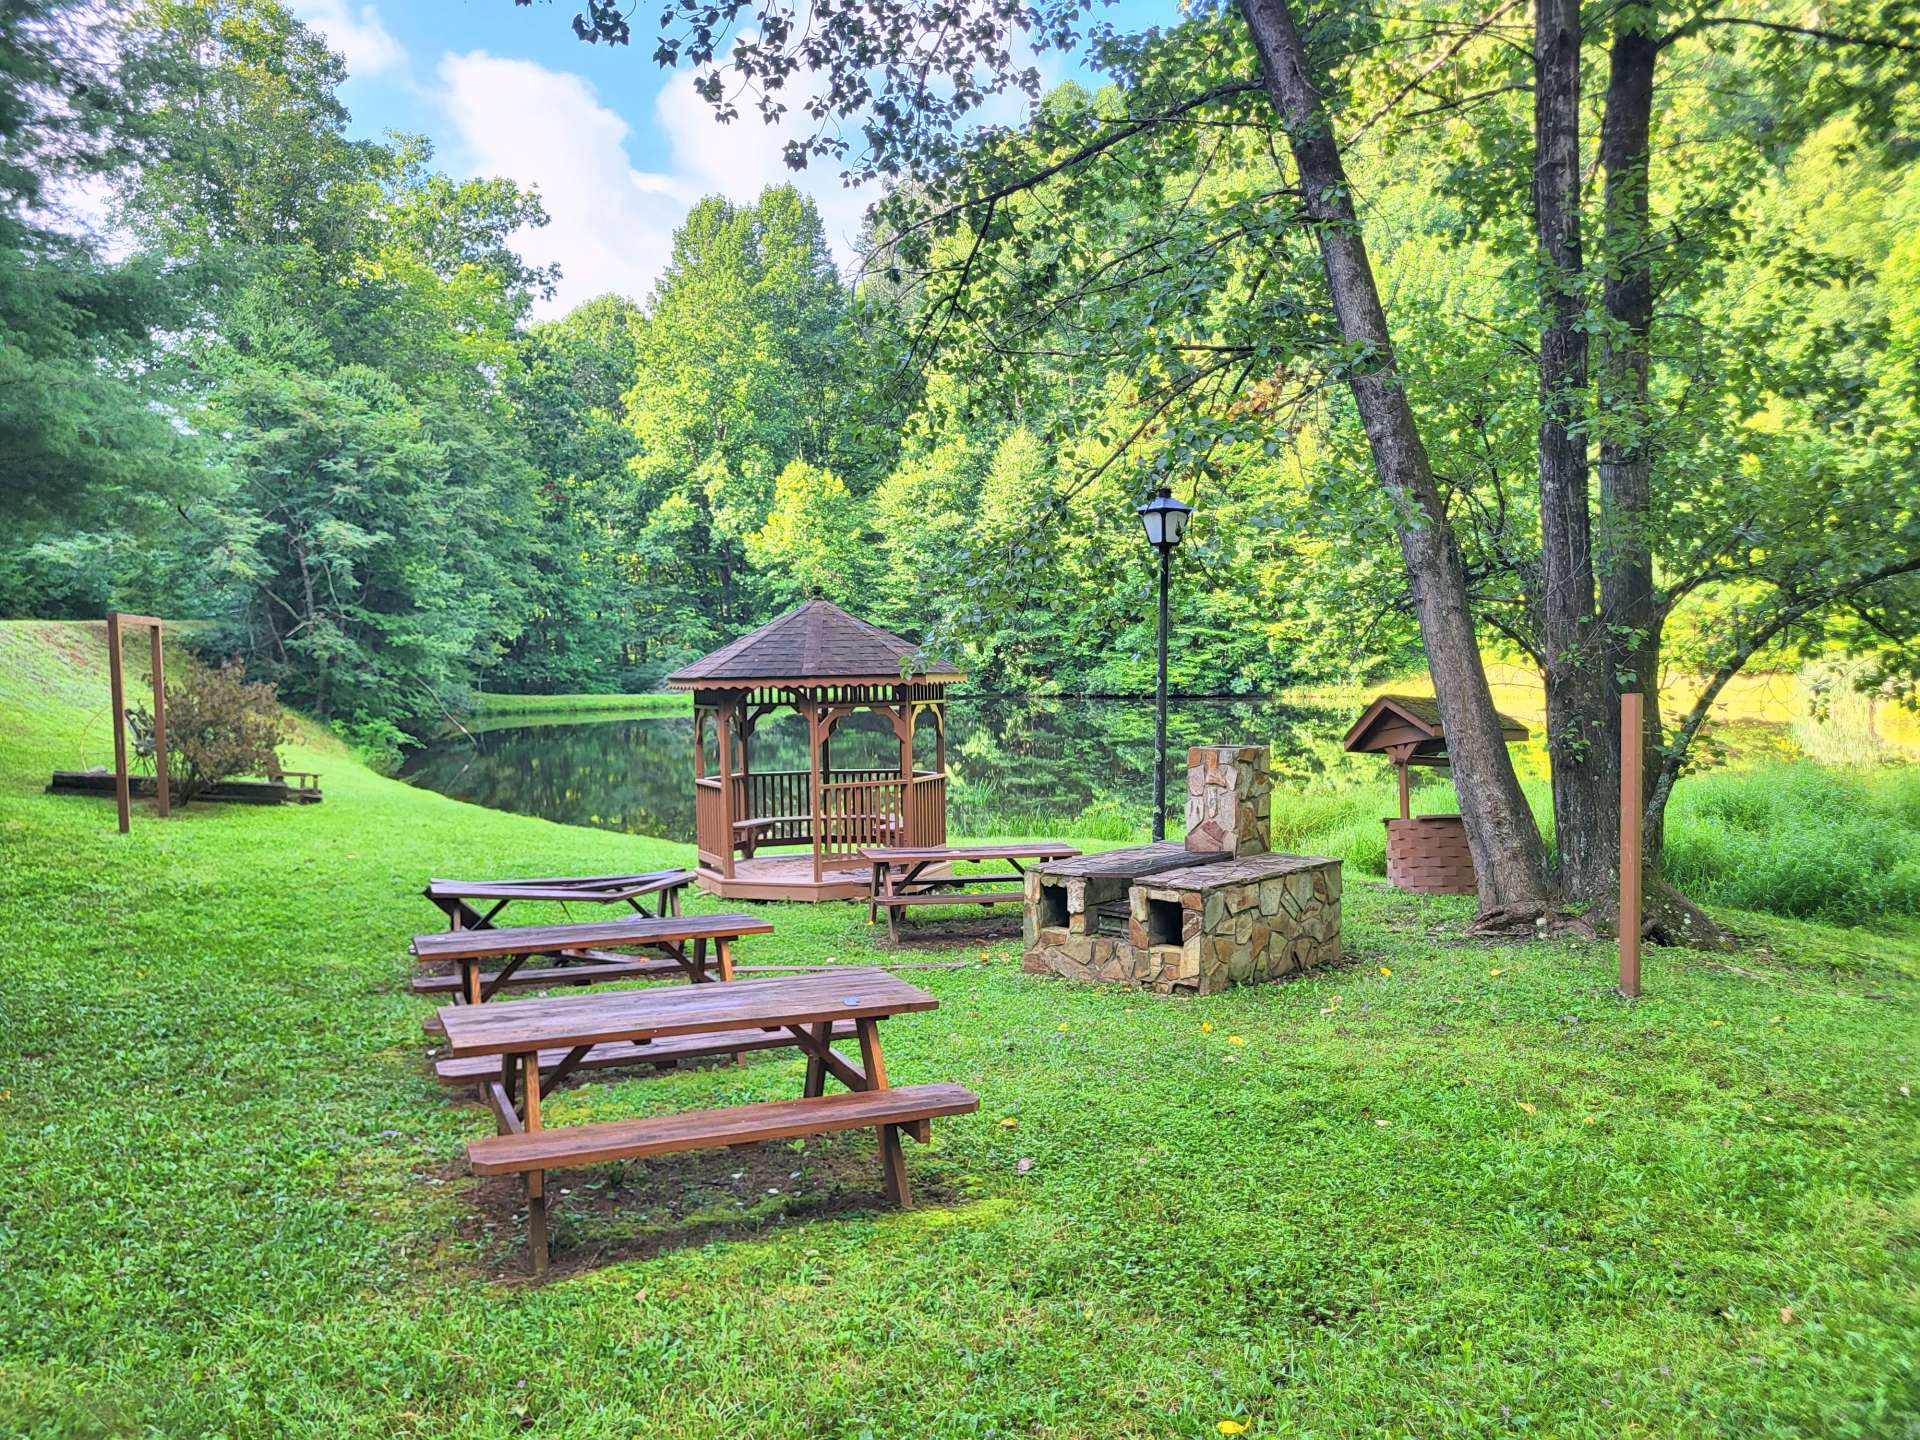 This homesite is located in NC Dreams, a quaint gated community offering a common area around the community-stocked pond and other common areas.